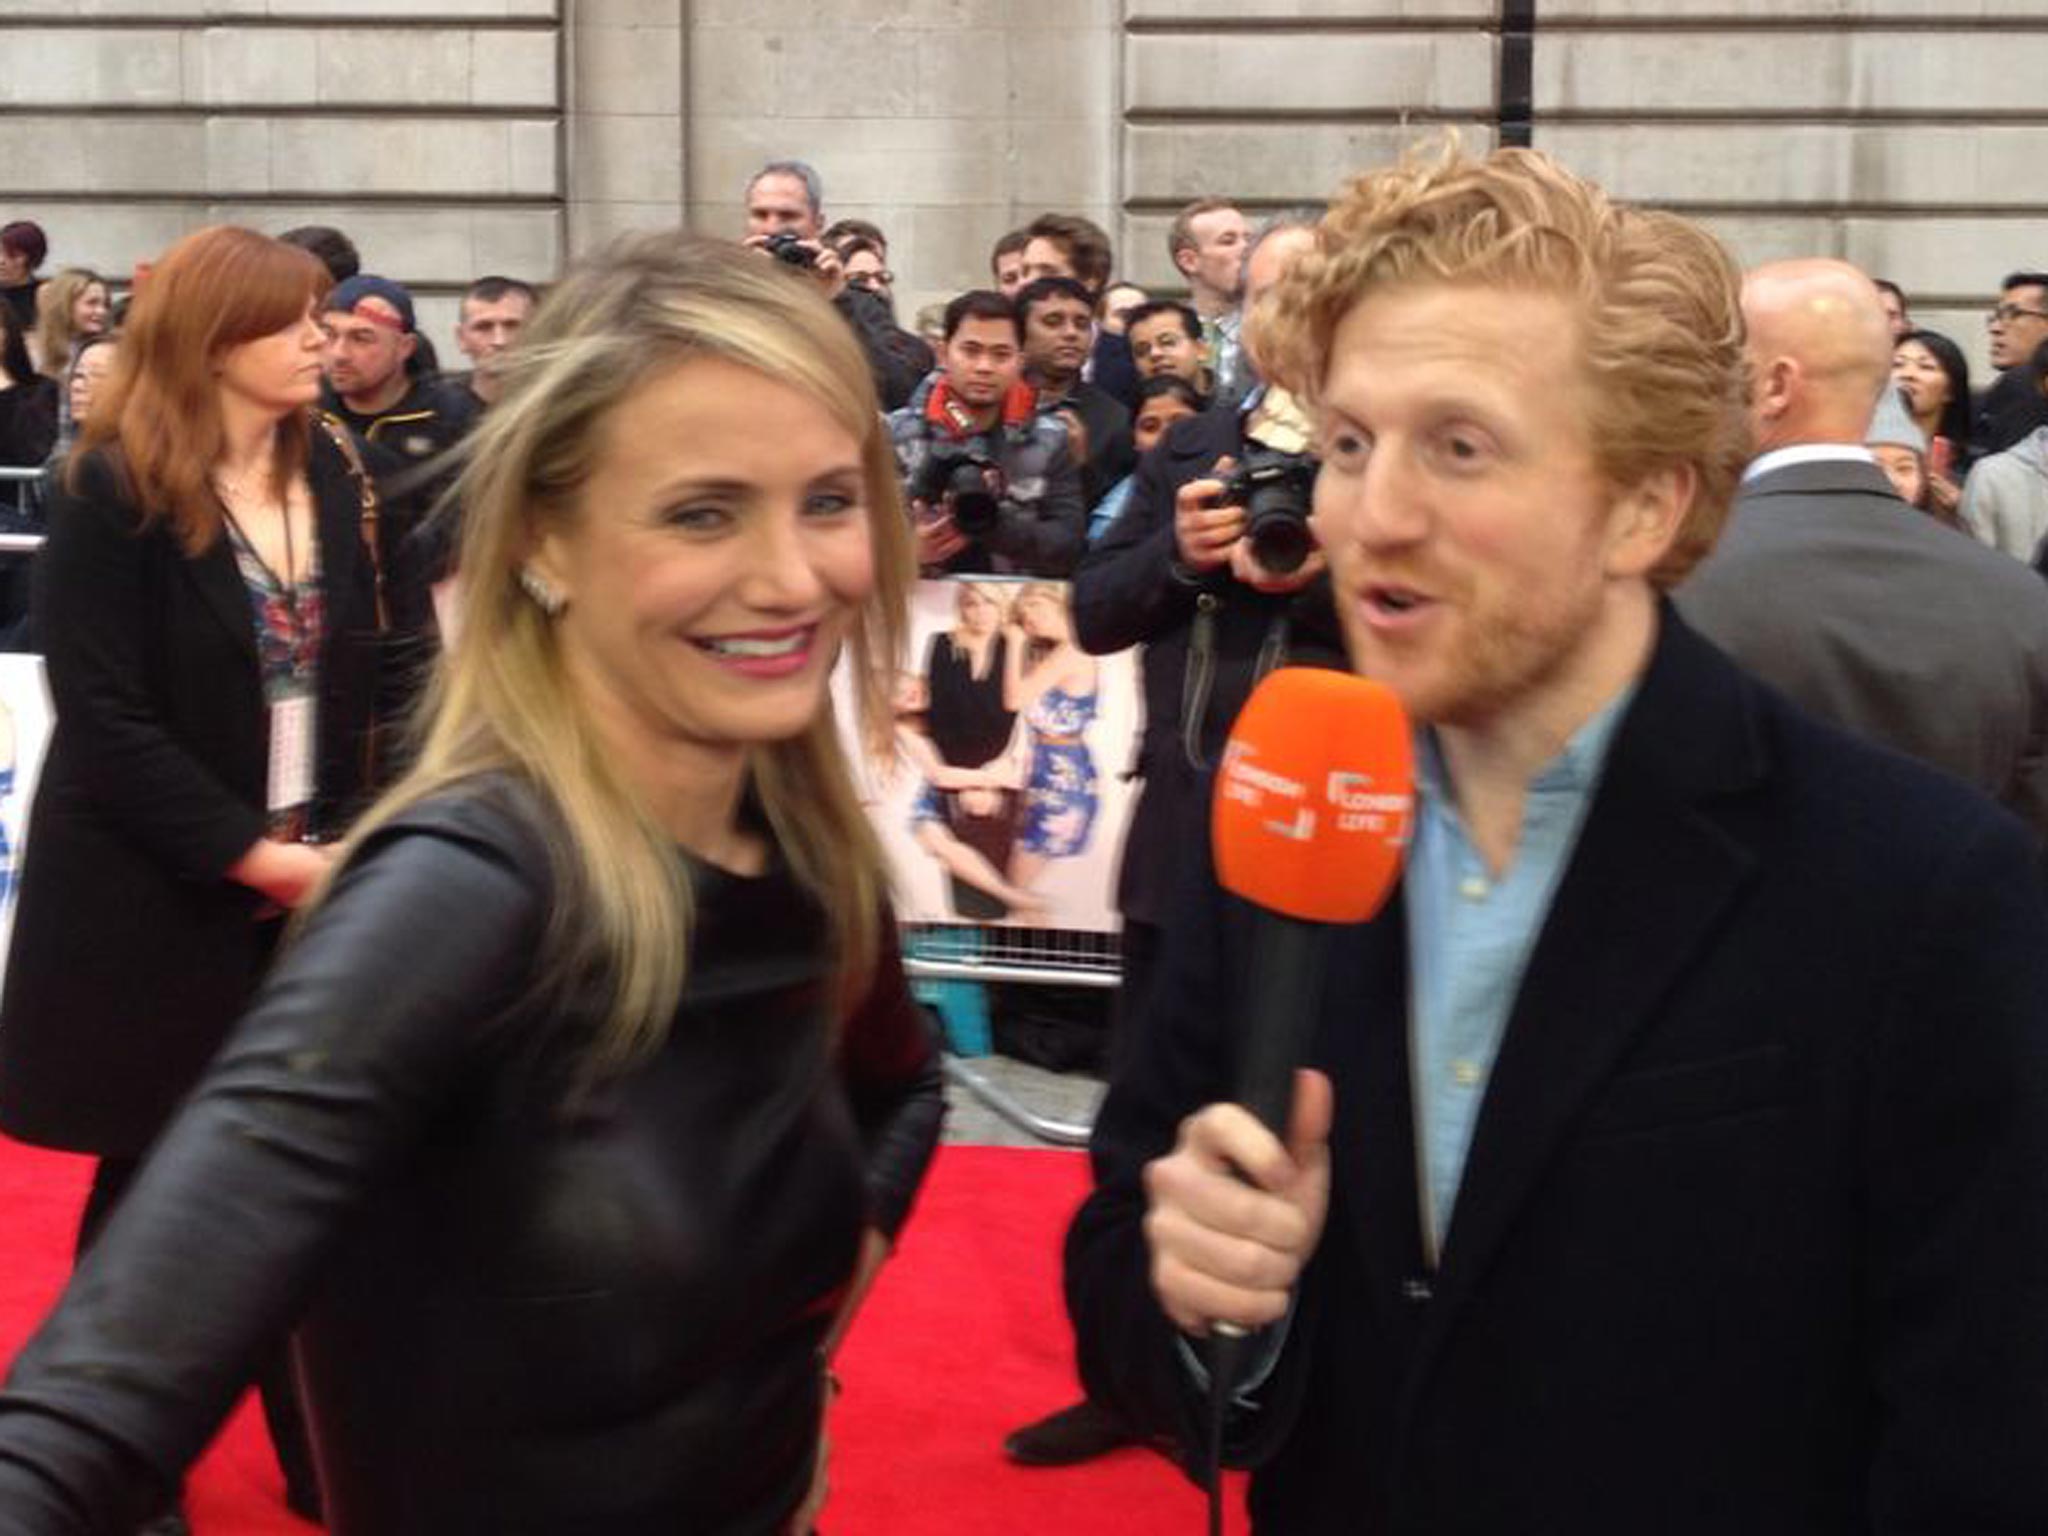 Luke Blackall interviews Cameron Diaz on the red carpet for the premiere of 'The Other Woman'